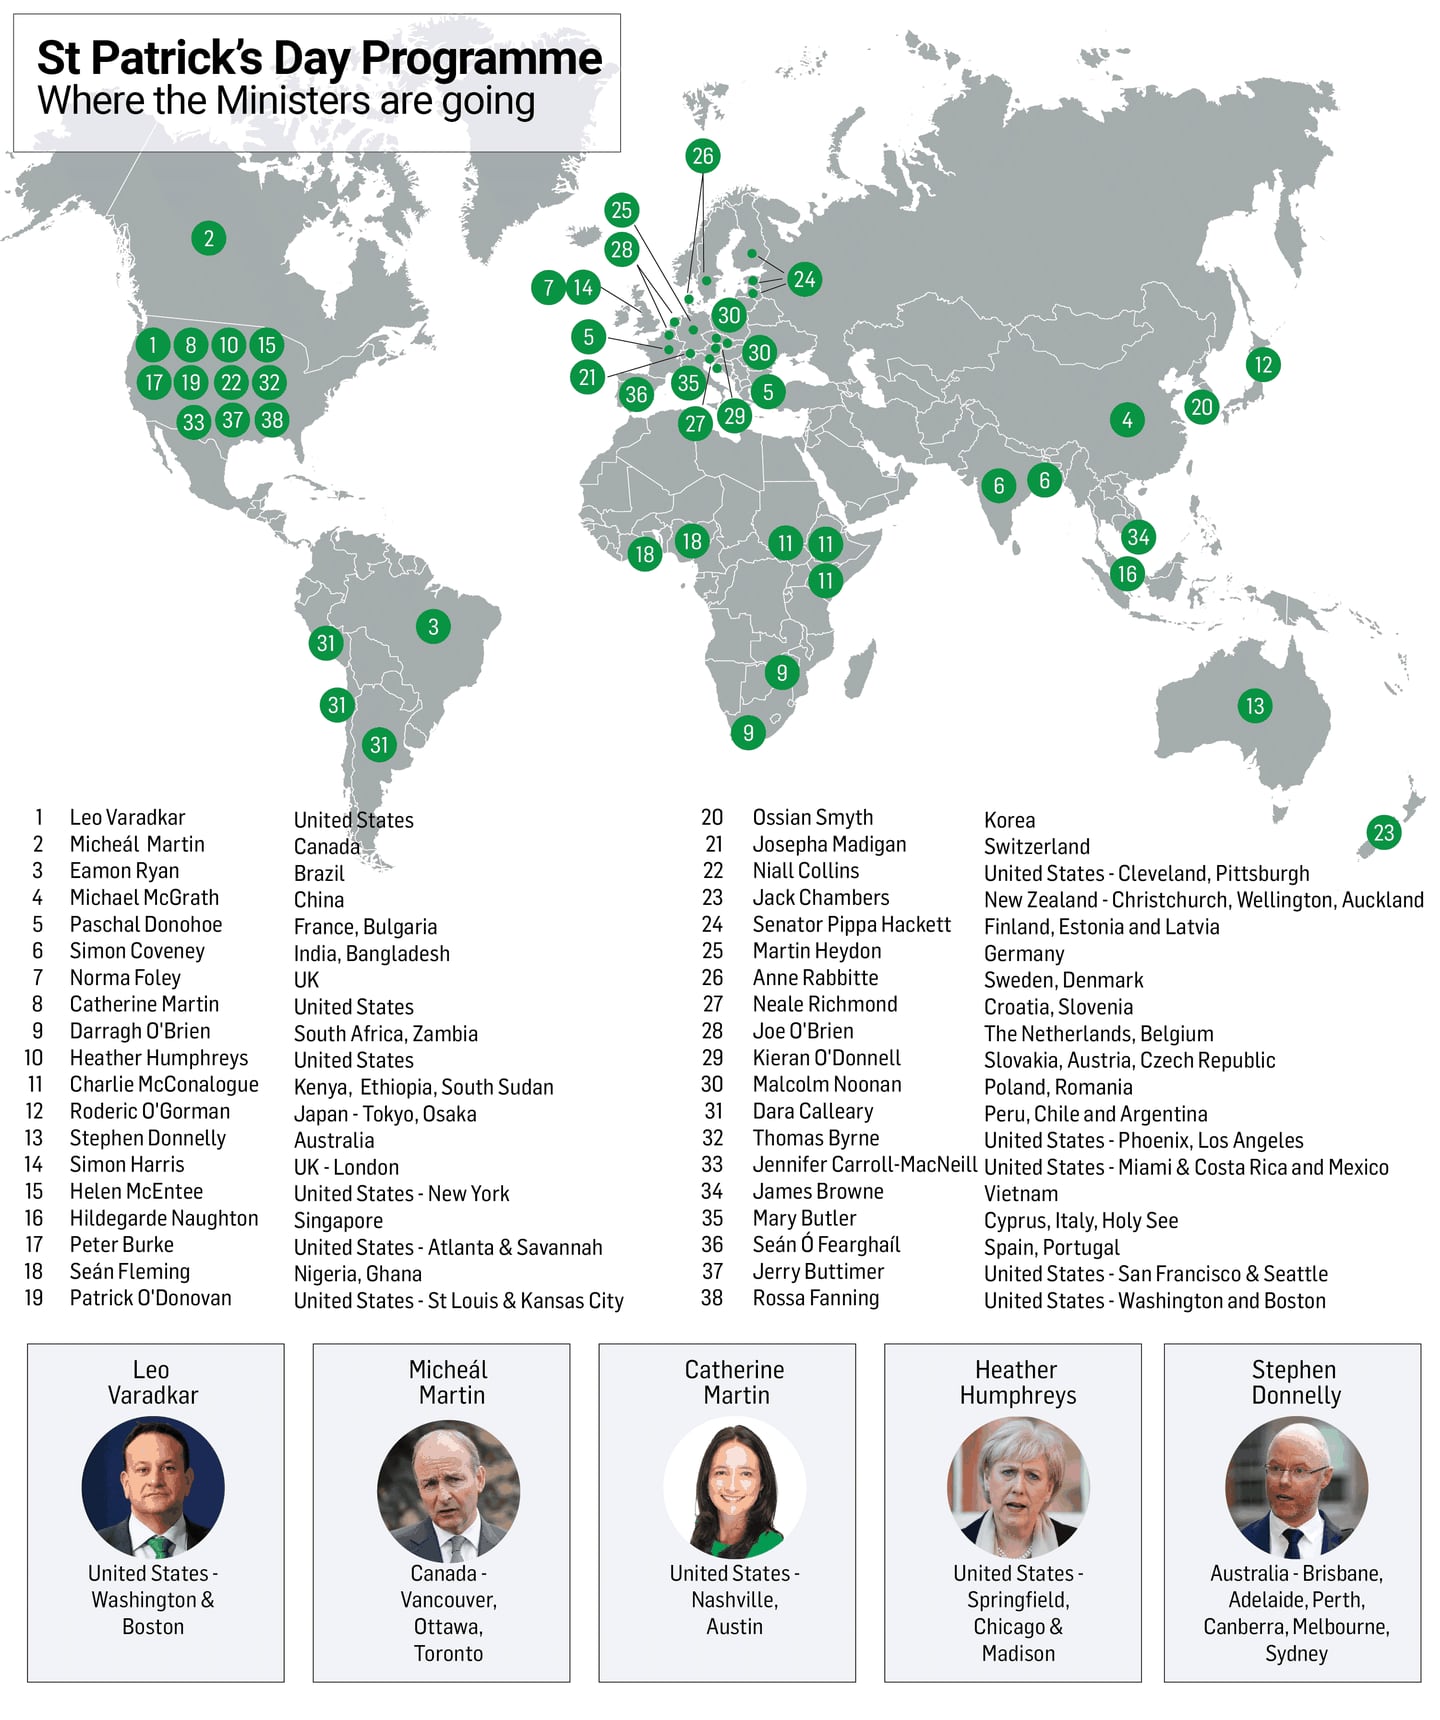 Map of all the destinations for diplomatic trips for St Patrick's Day